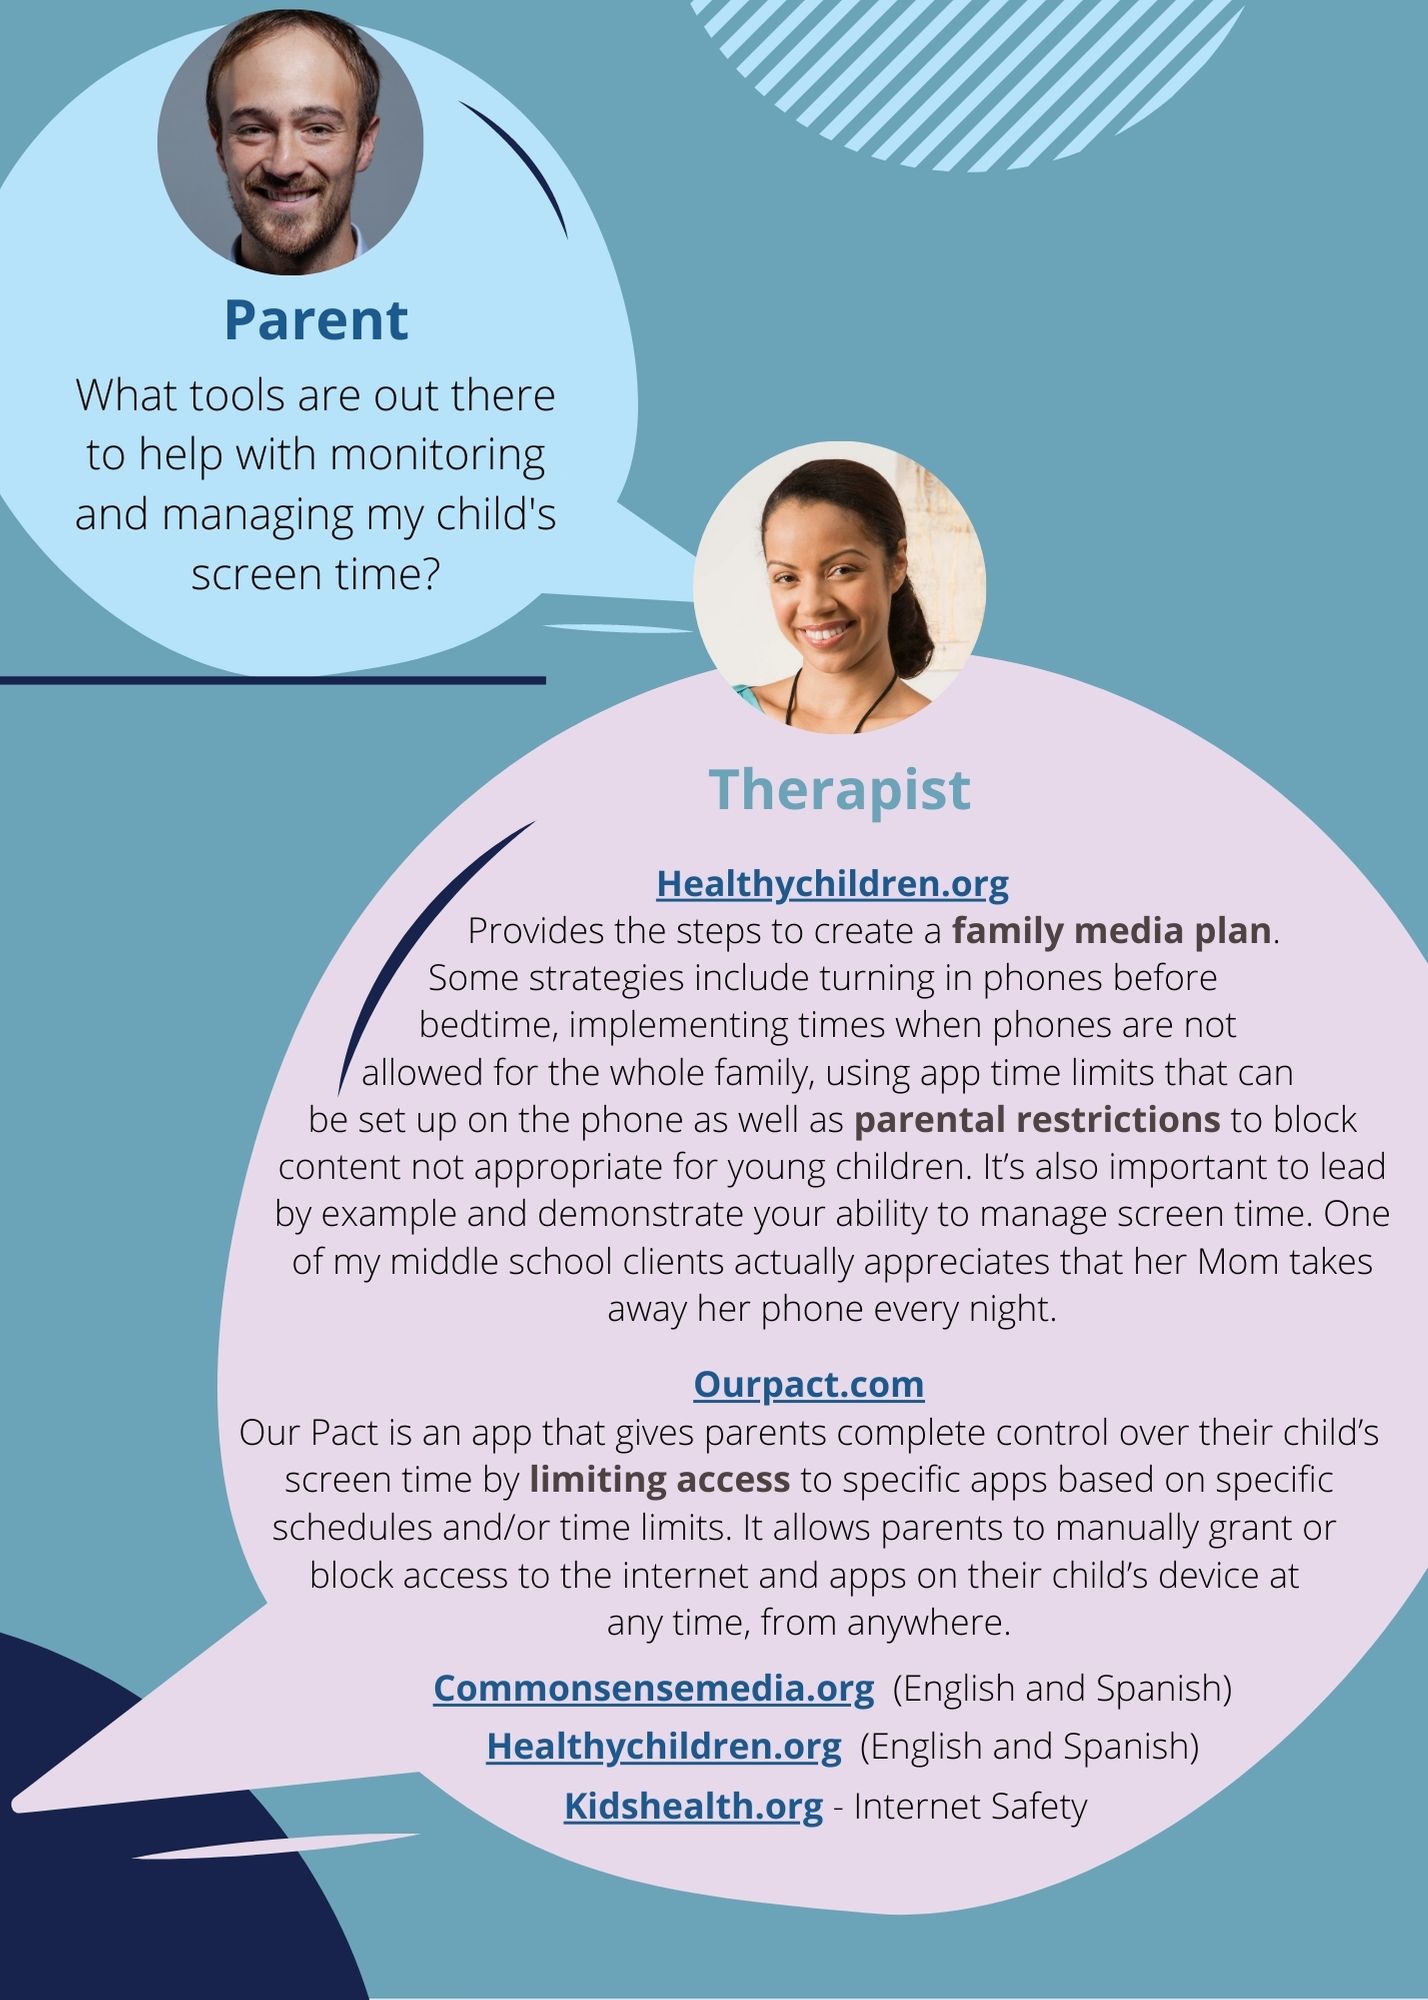 A parent asks, "What tools can help monitor or manage my child's screen time?" A therapist responds with several websites: healthy children.org, our pact.com, common sense media.org, healthy children.org, and kids health.org